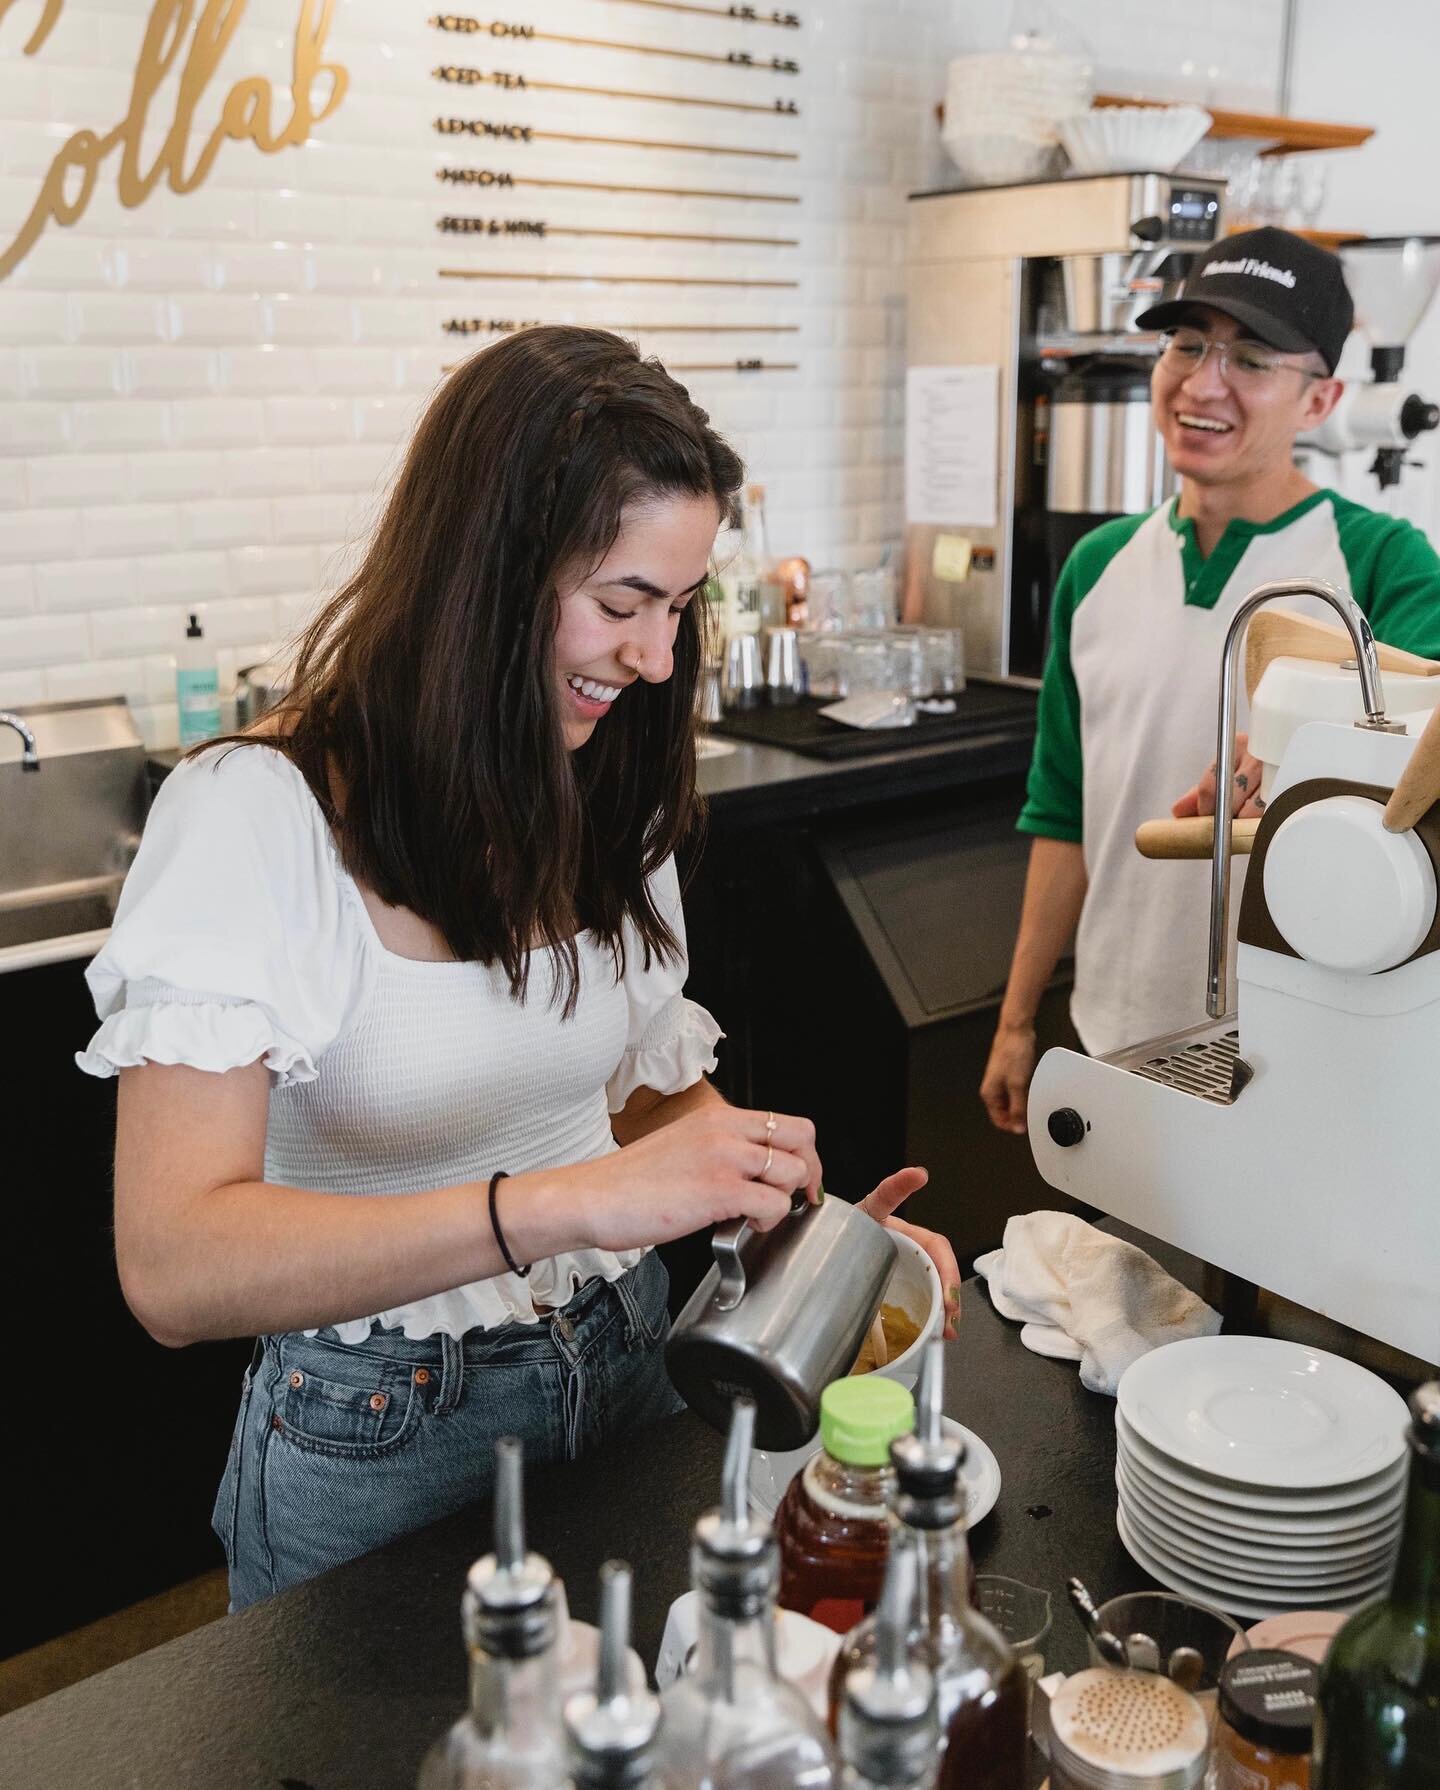 We&rsquo;re here and pouring away! Come grab some mid-week fuel, and let&rsquo;s finish this week strong! ☕️
⠀⠀⠀⠀⠀⠀⠀⠀⠀
#collabcoffee #thecollaborative #tulsaok #midtowntulsa #coffeetulsa #tulsacoffee #tulsacoffeeshop #visittulsa #baristadaily #shoplo